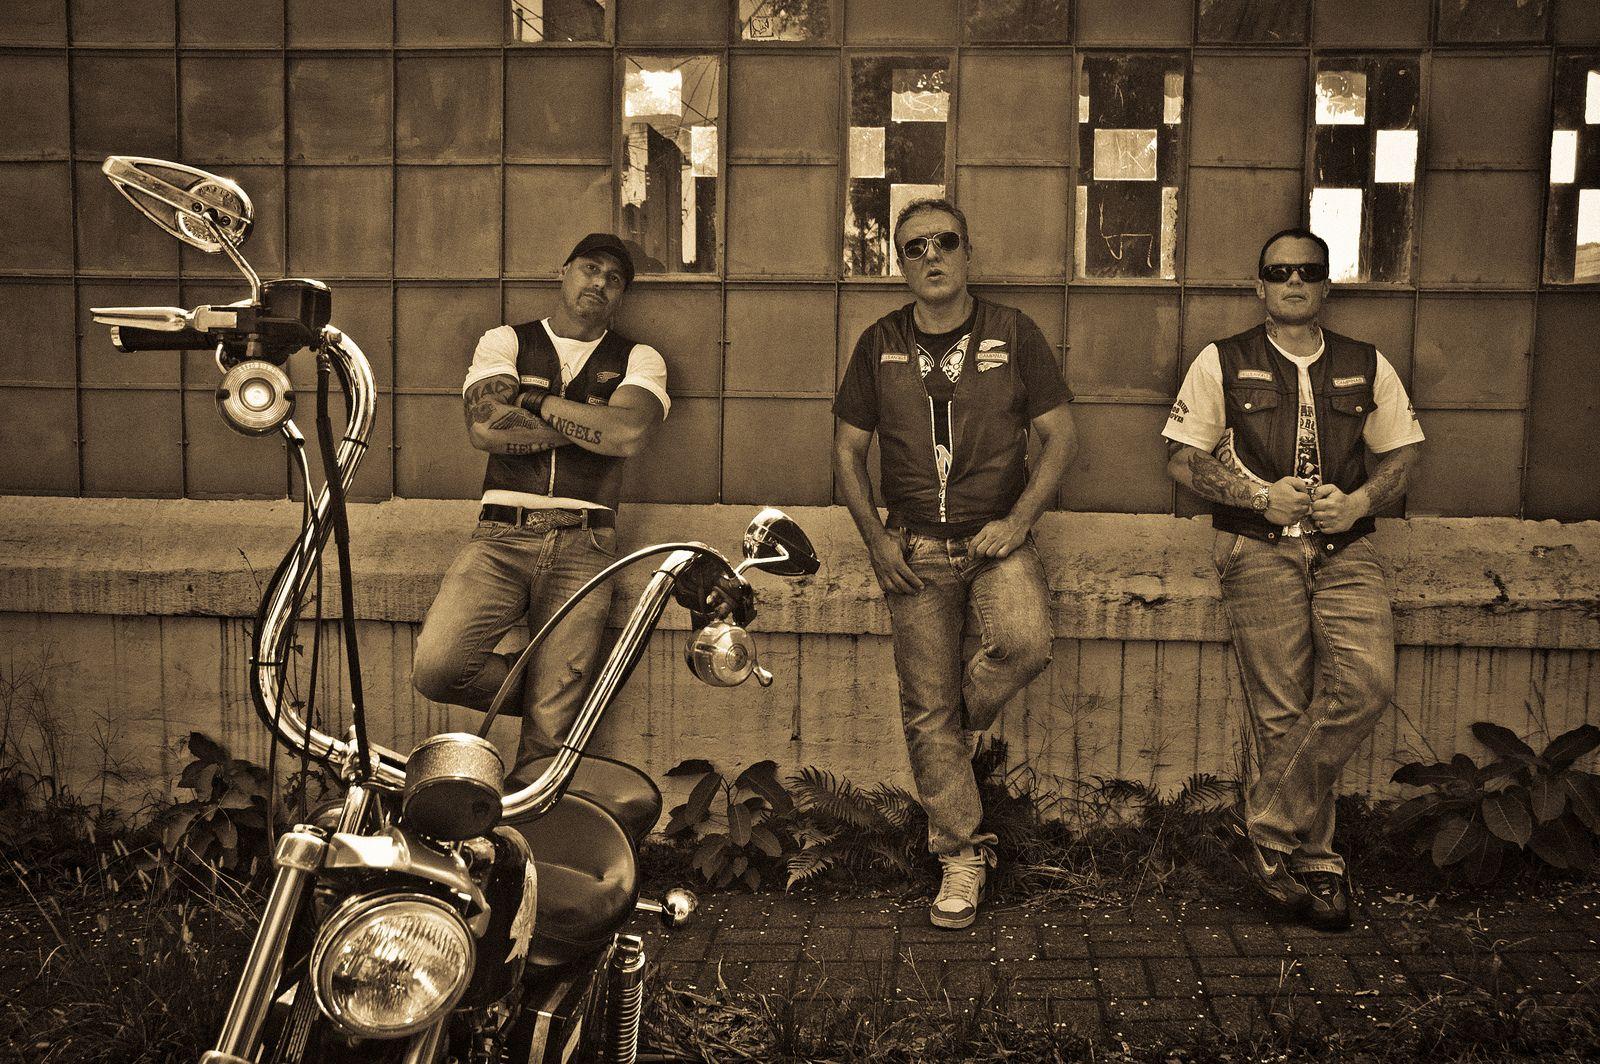 Hells Angels Brazil Wallpapers and Backgrounds Image.